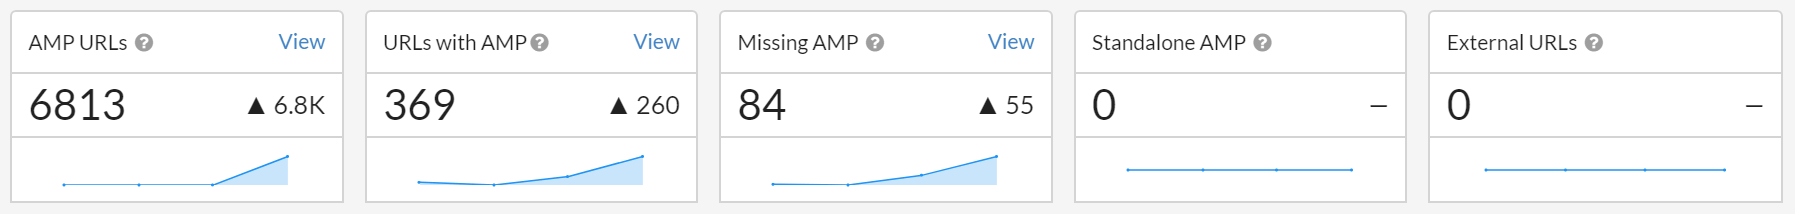 AMP discovered pages